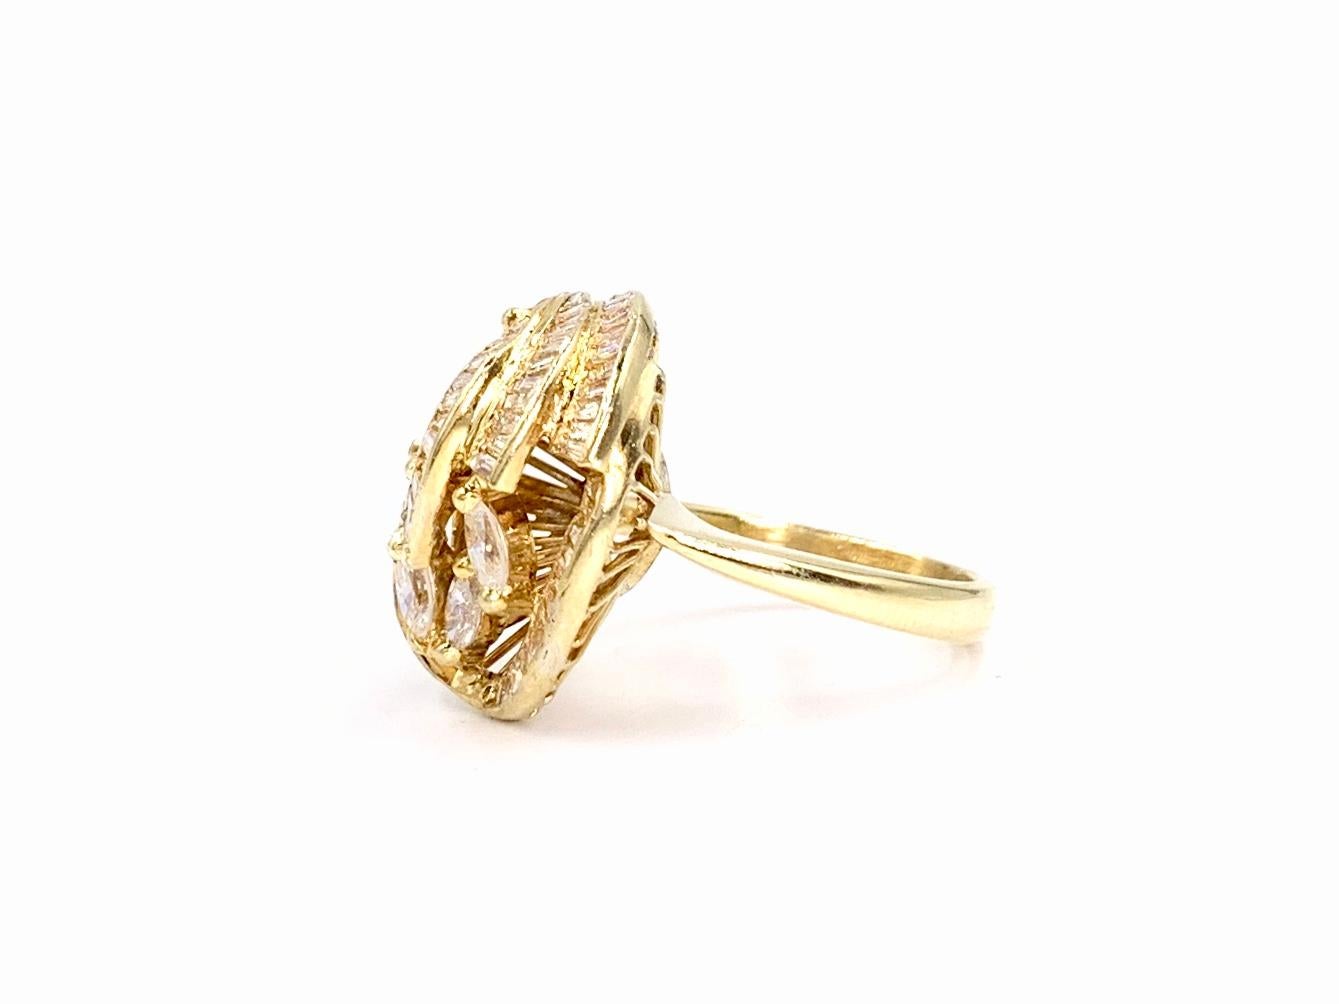 18 Karat and Diamond Vintage Swirl Ring In Fair Condition For Sale In Pikesville, MD